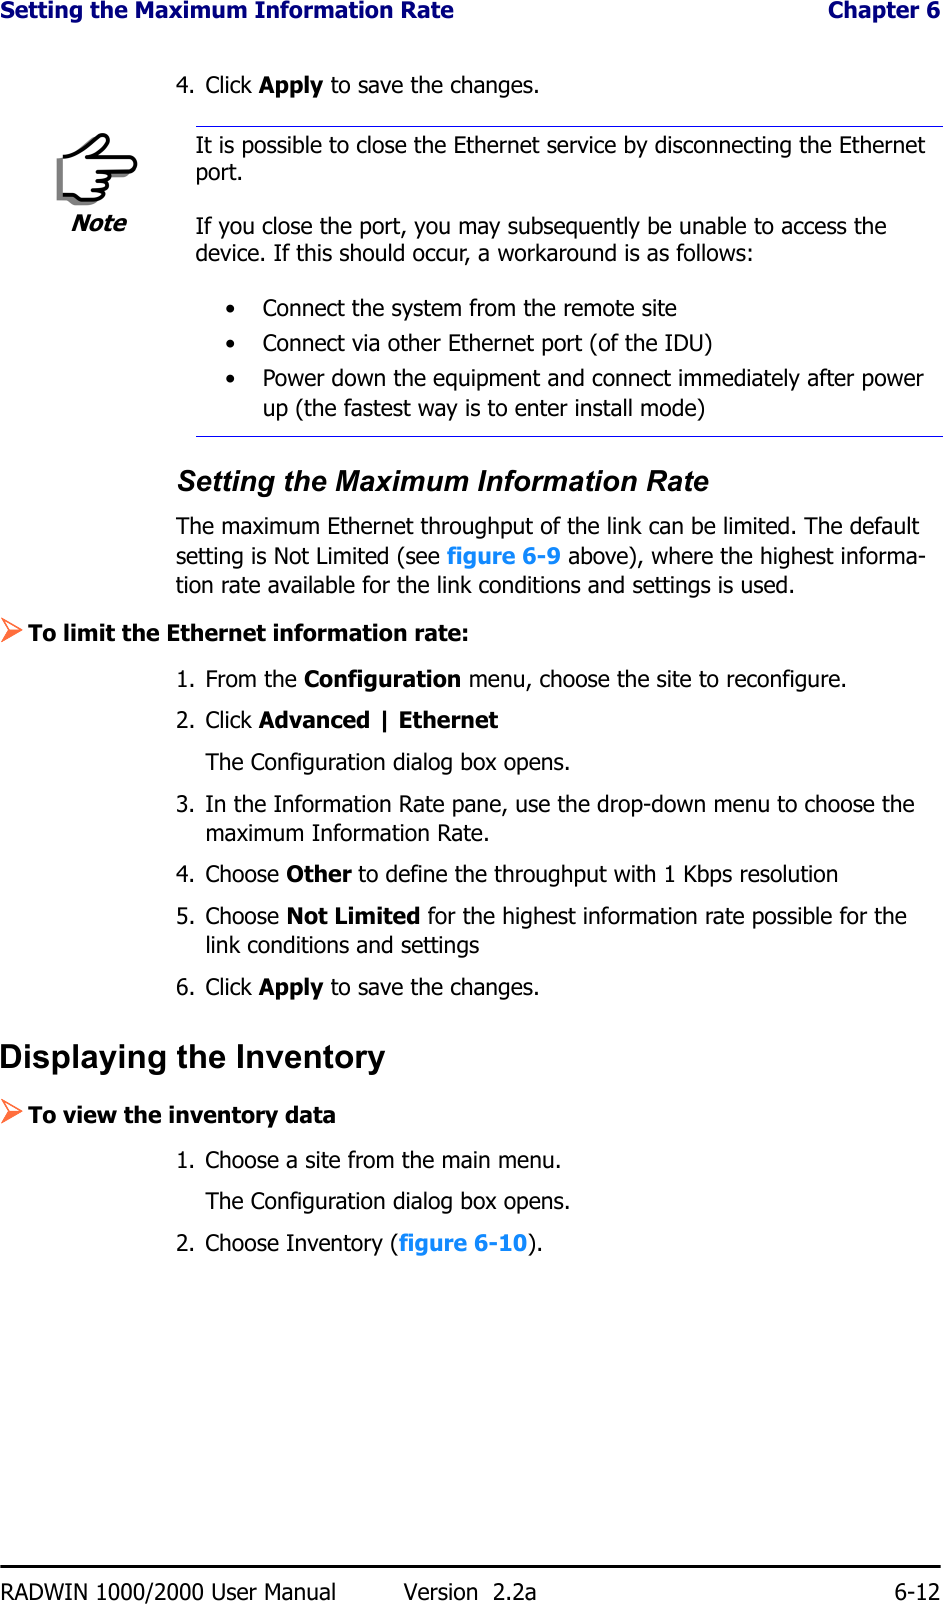 Setting the Maximum Information Rate  Chapter 6RADWIN 1000/2000 User Manual Version  2.2a 6-124. Click Apply to save the changes.Setting the Maximum Information RateThe maximum Ethernet throughput of the link can be limited. The default setting is Not Limited (see figure 6-9 above), where the highest informa-tion rate available for the link conditions and settings is used.¾To limit the Ethernet information rate:1. From the Configuration menu, choose the site to reconfigure.2. Click Advanced | EthernetThe Configuration dialog box opens.3. In the Information Rate pane, use the drop-down menu to choose the maximum Information Rate.4. Choose Other to define the throughput with 1 Kbps resolution5. Choose Not Limited for the highest information rate possible for the link conditions and settings6. Click Apply to save the changes.Displaying the Inventory¾To view the inventory data1. Choose a site from the main menu.The Configuration dialog box opens.2. Choose Inventory (figure 6-10).NoteIt is possible to close the Ethernet service by disconnecting the Ethernet port.If you close the port, you may subsequently be unable to access the device. If this should occur, a workaround is as follows:• Connect the system from the remote site• Connect via other Ethernet port (of the IDU)• Power down the equipment and connect immediately after power up (the fastest way is to enter install mode)